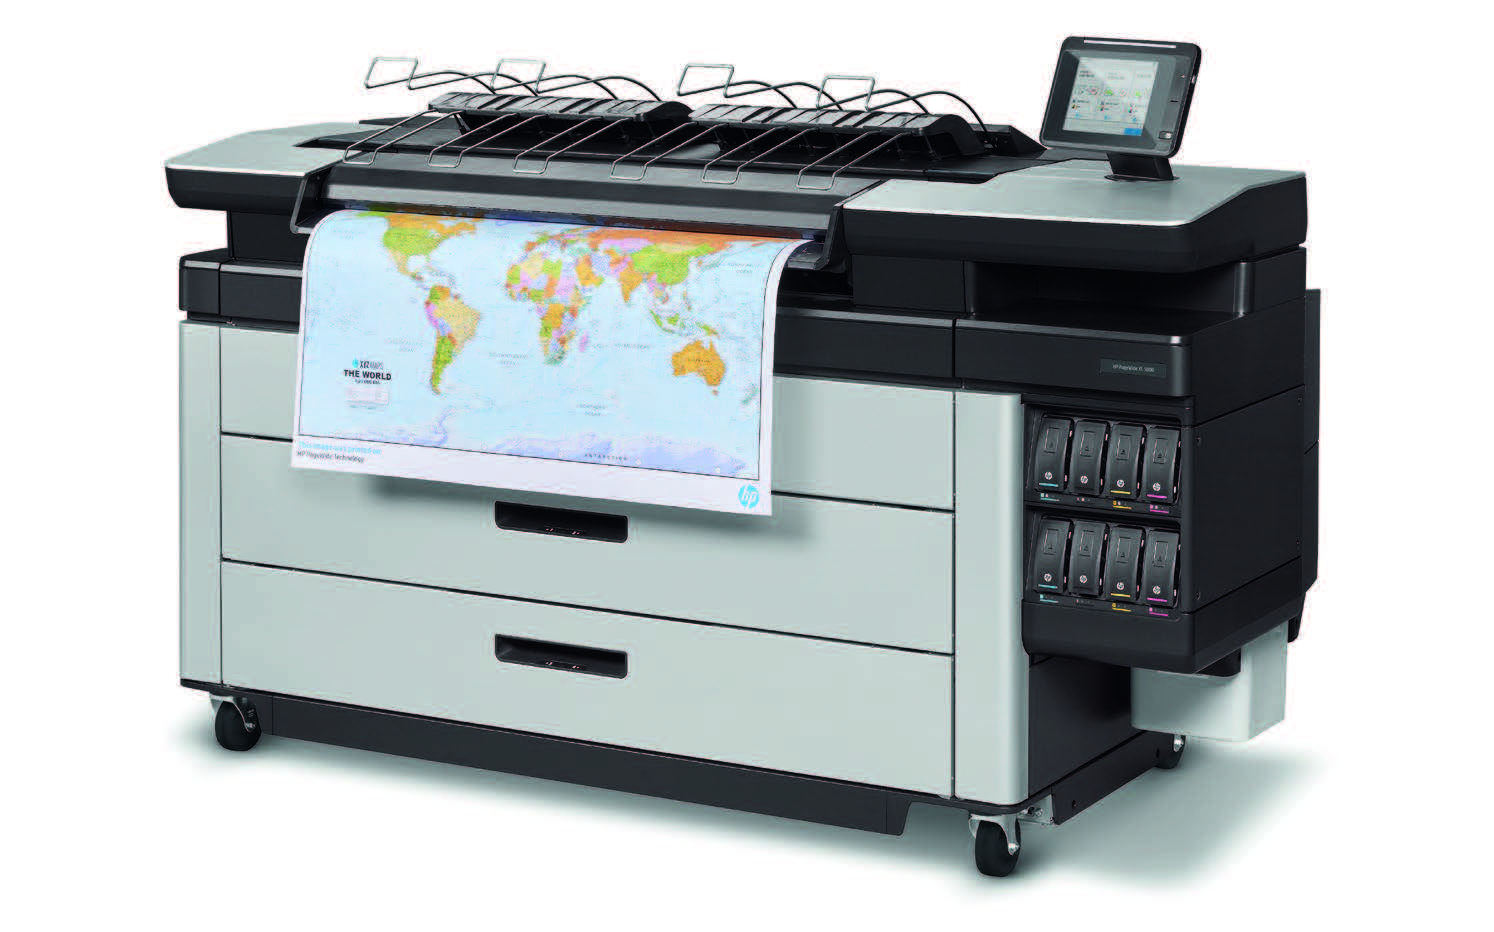 R. Joe Harris Enjoys Faster Print Speeds, Better Quality and Improved Productivity